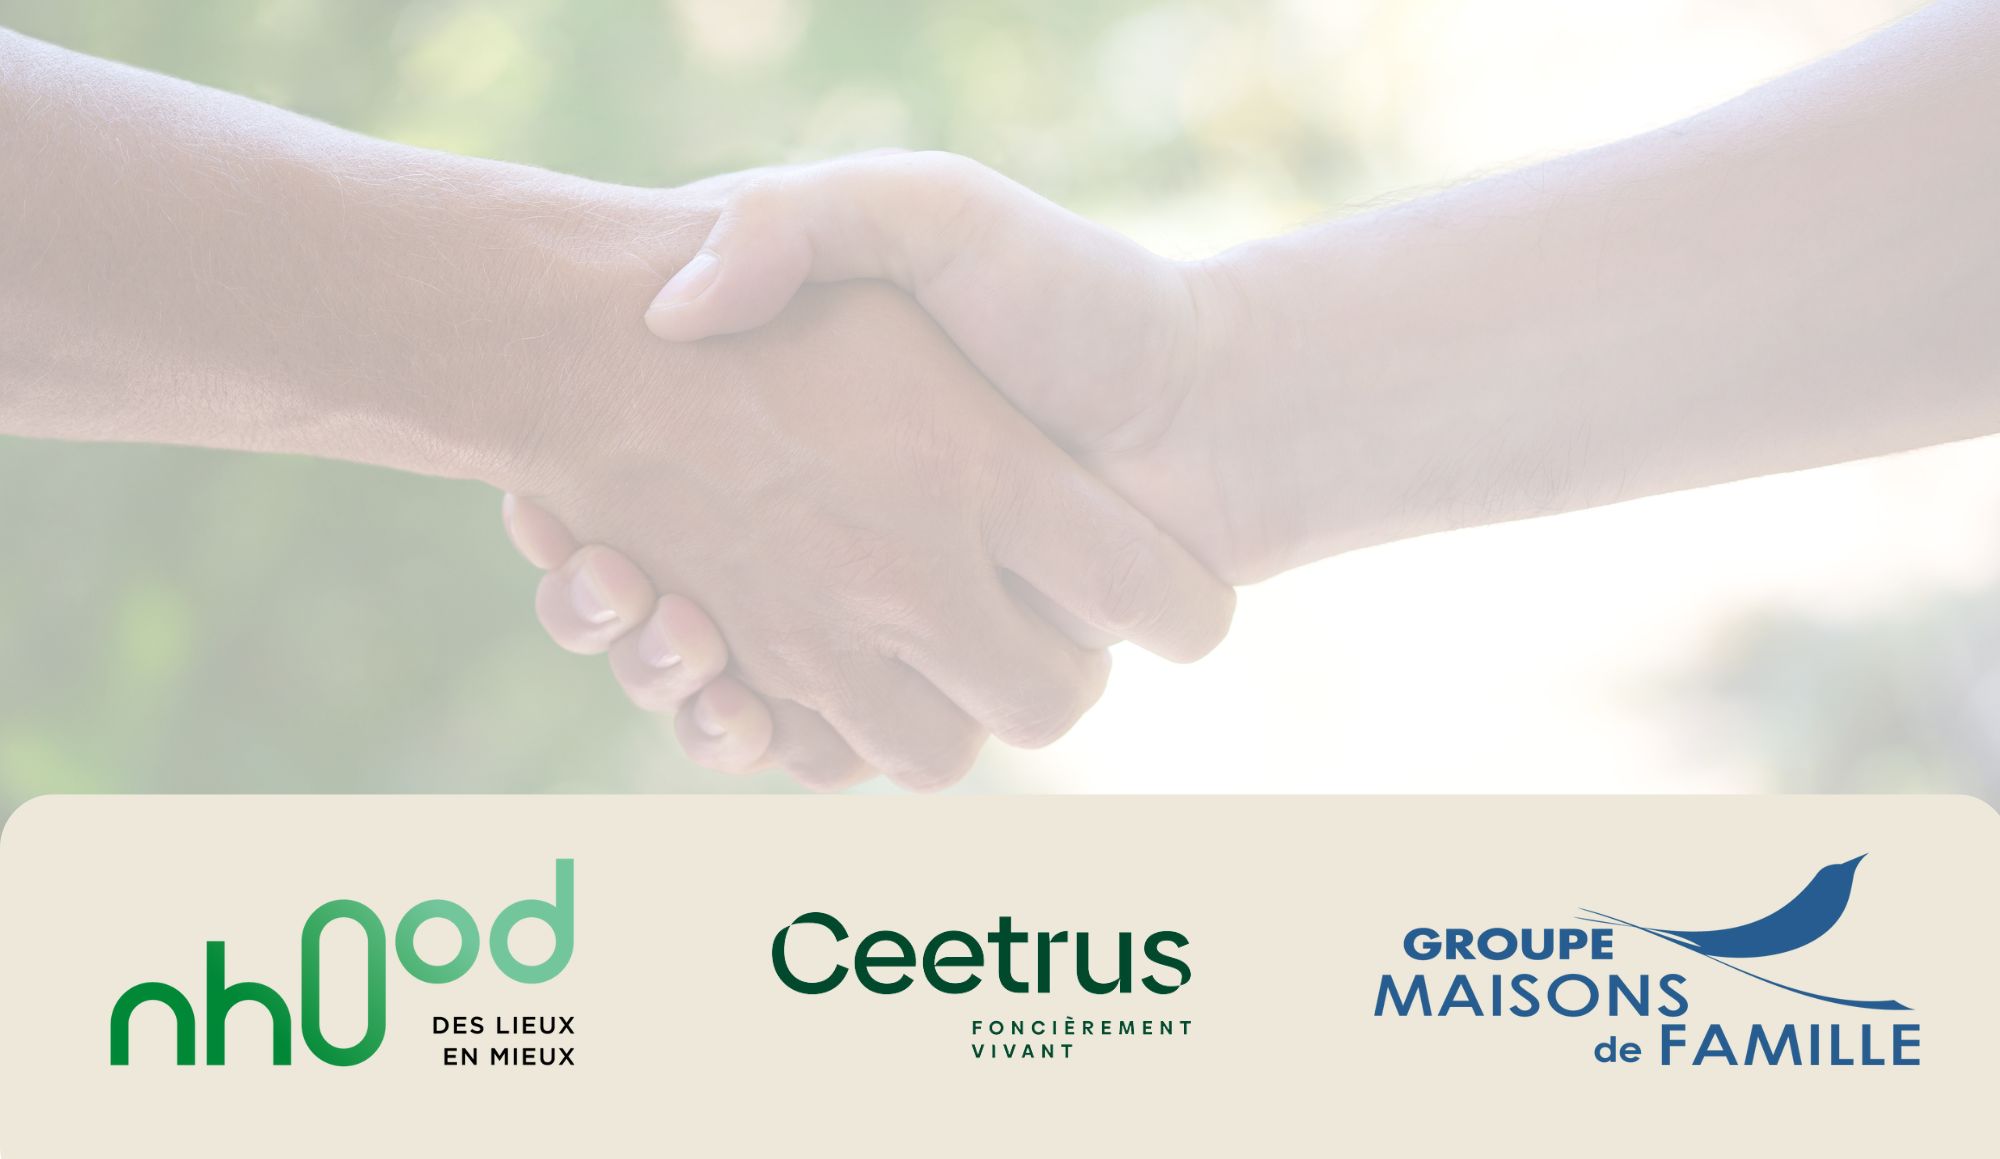 Ceetrus joins forces with Maisons de Famille Groupto work with Nhood to bring about the sustainable transformation oflocal living spaces in support of ageing well